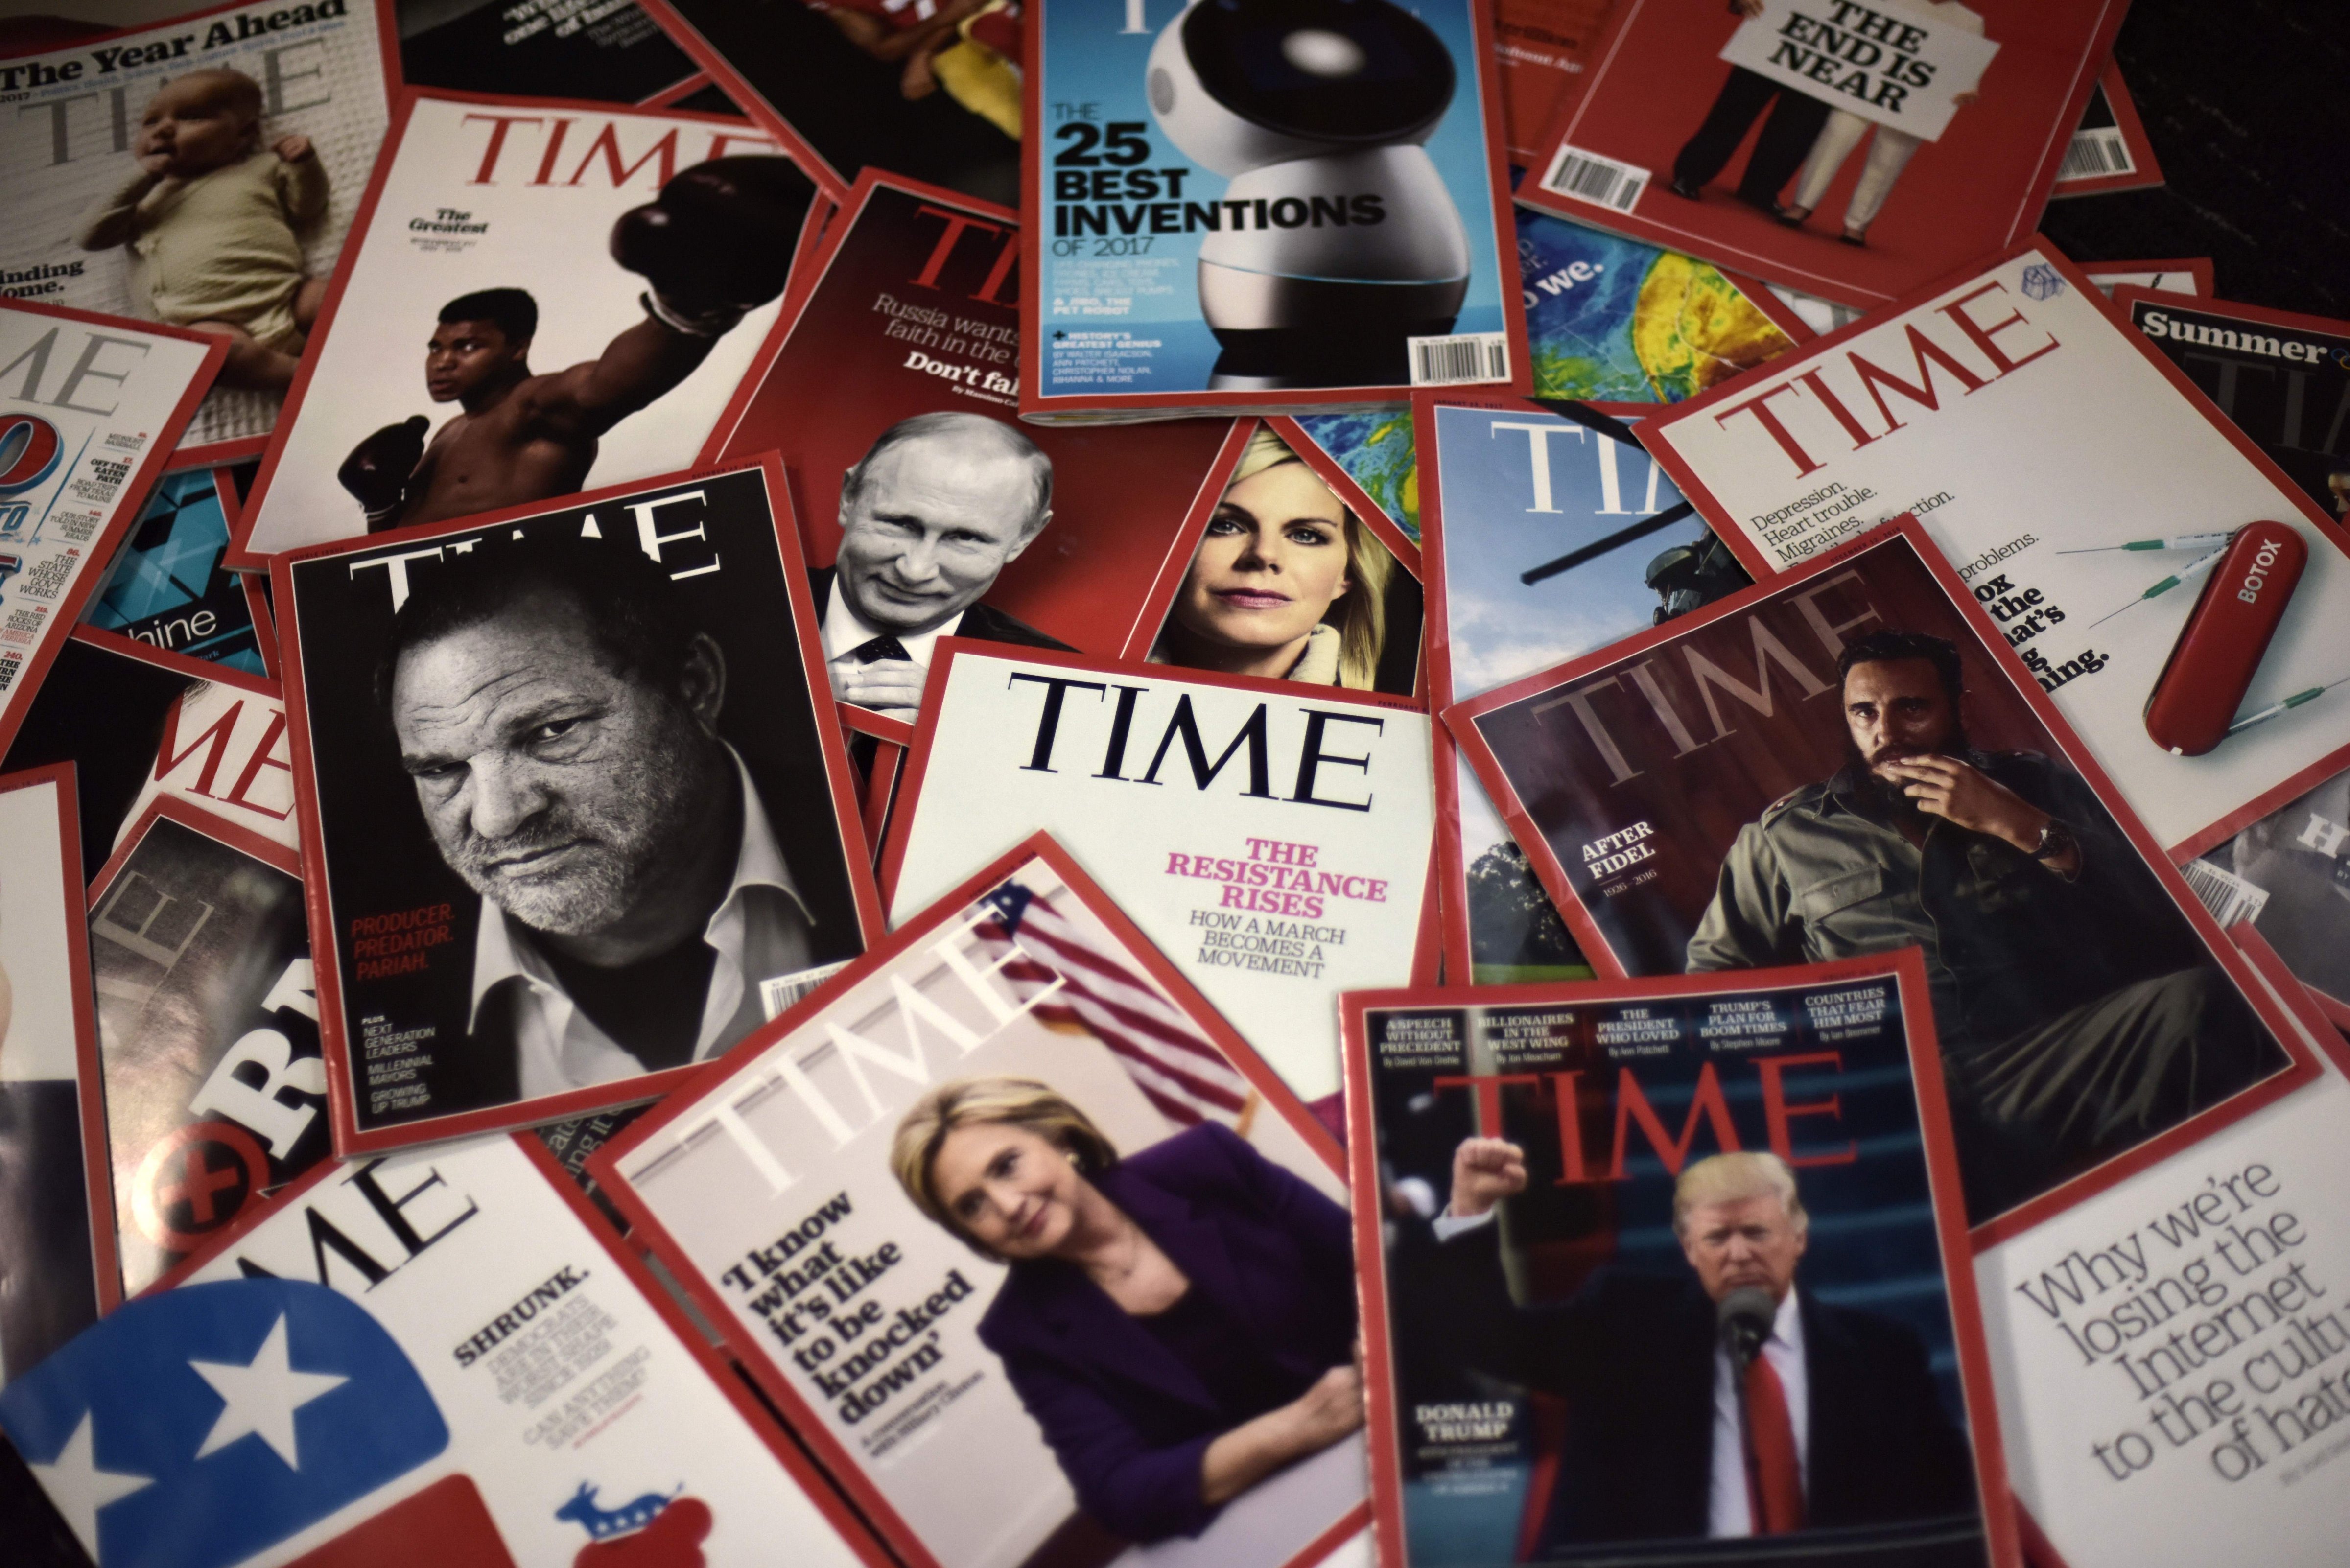 Time magazine copies are displayed on a table in Washington on November 27, 2017. (ERIC BARADAT/AFP/Getty Images)